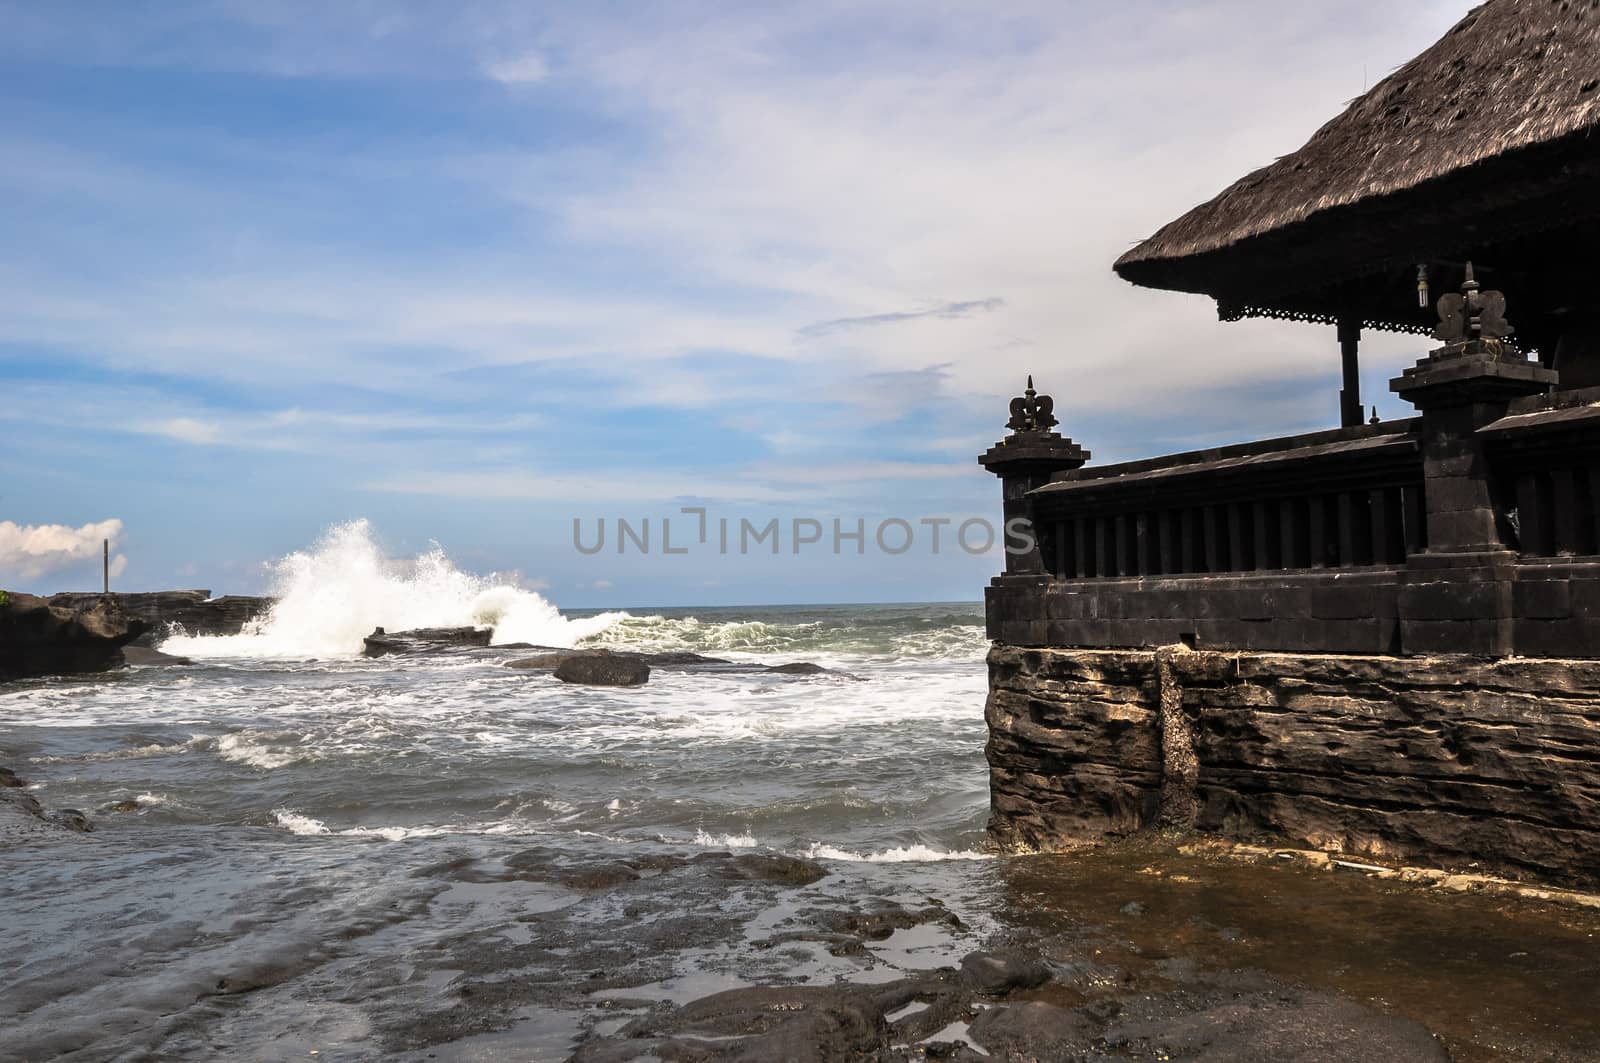 Tanah Lot Temple on Sea in Bali Island Indonesia by weltreisendertj